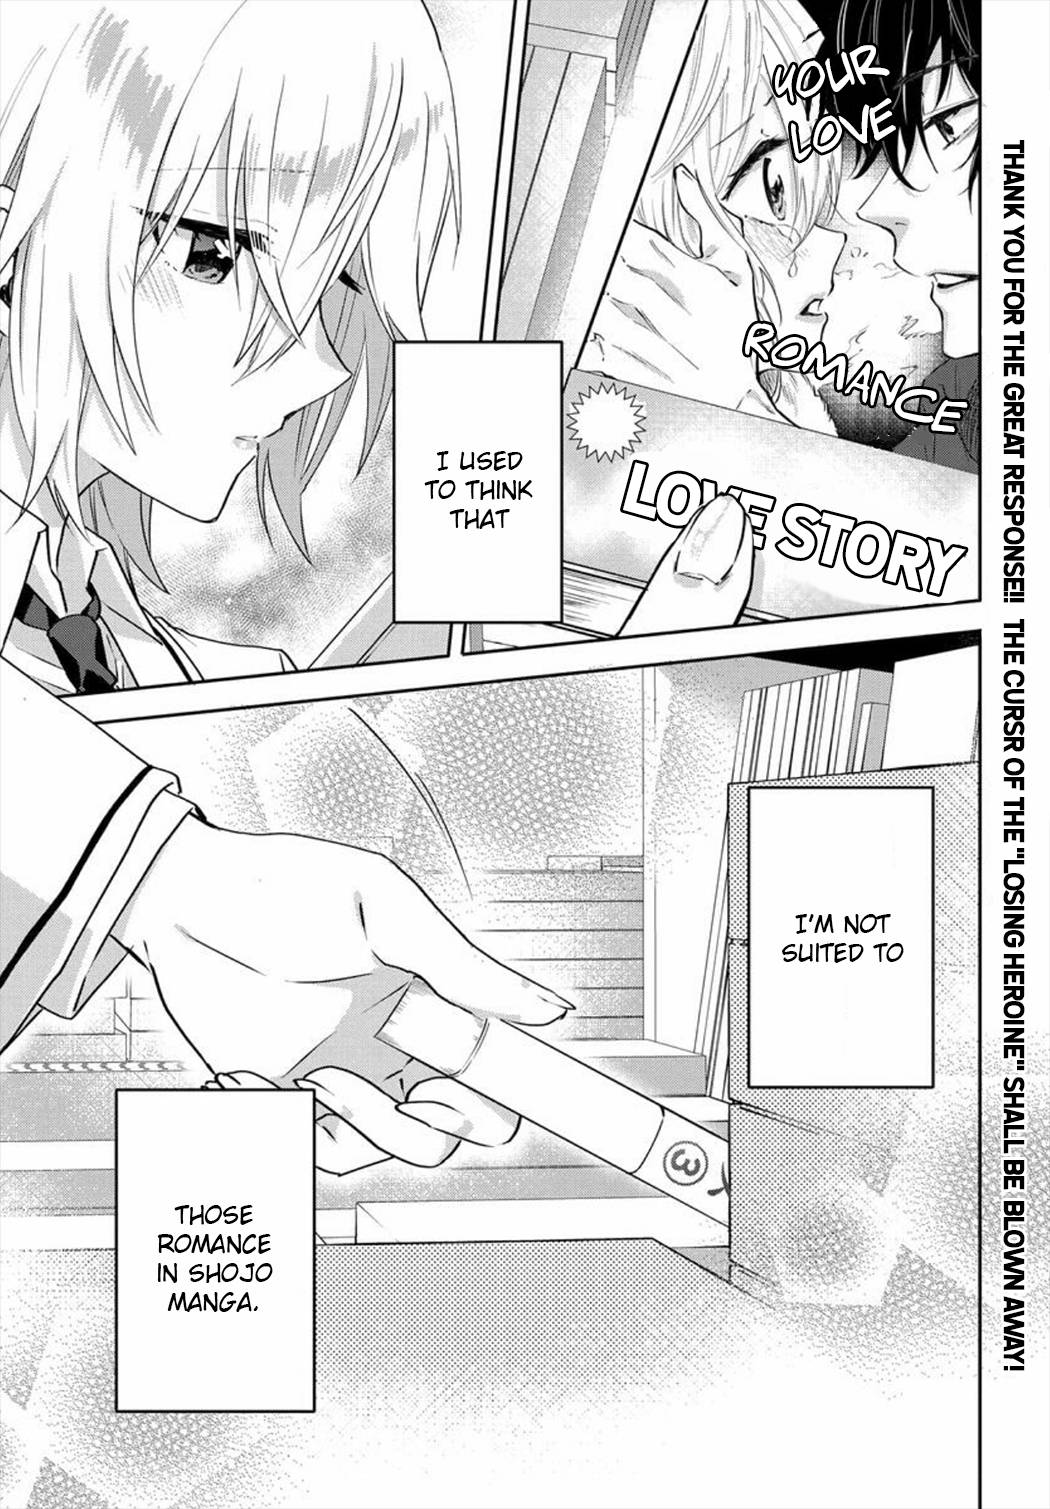 Since I’Ve Entered The World Of Romantic Comedy Manga, I’Ll Do My Best To Make The Losing Heroine Happy - chapter 2.1 - #1